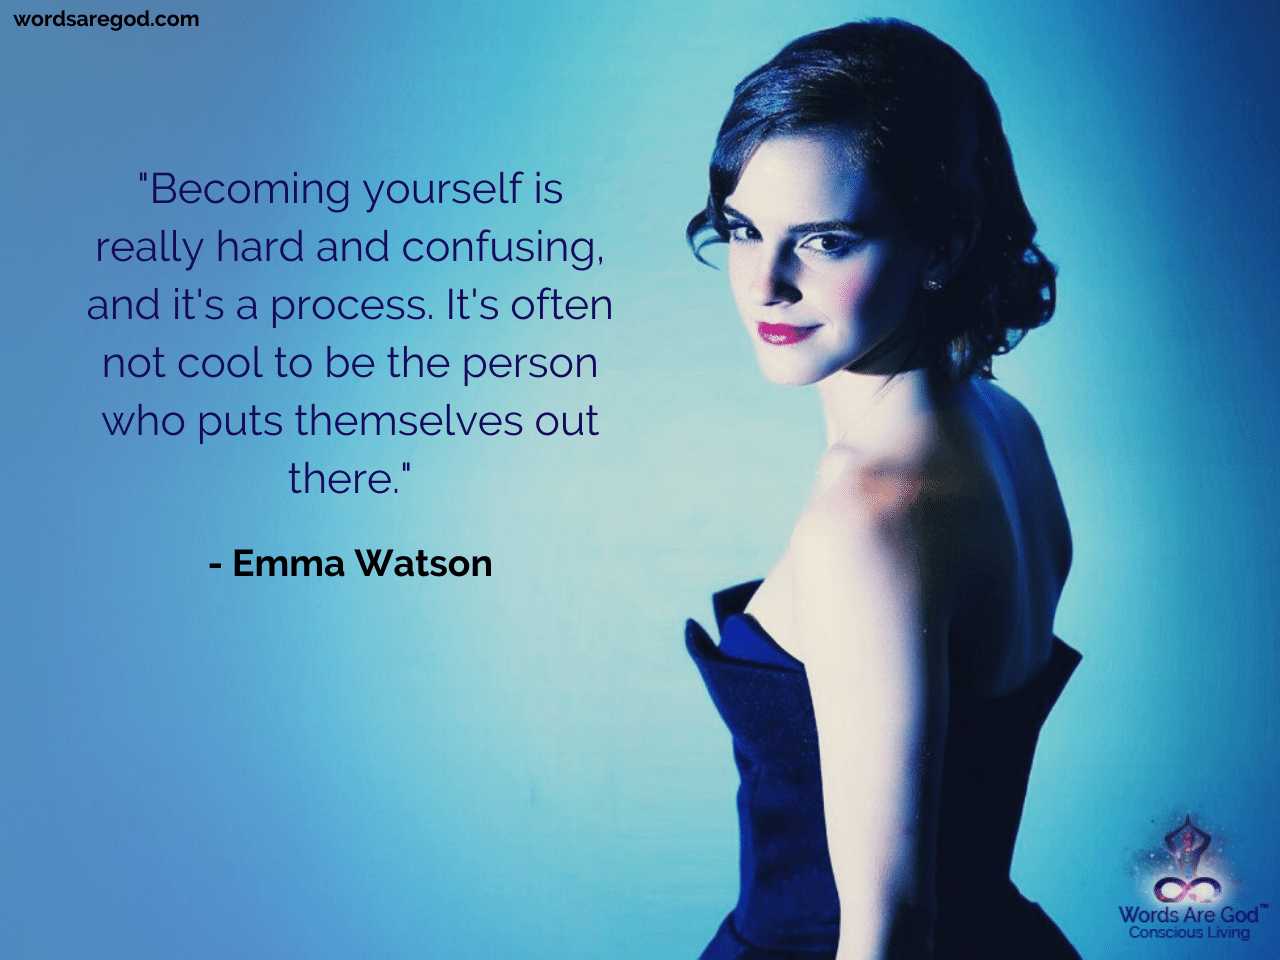 Emma Watson Quotes. Life Quotes In English. Life Quotes Motivational. Music Quotes Wallpaper